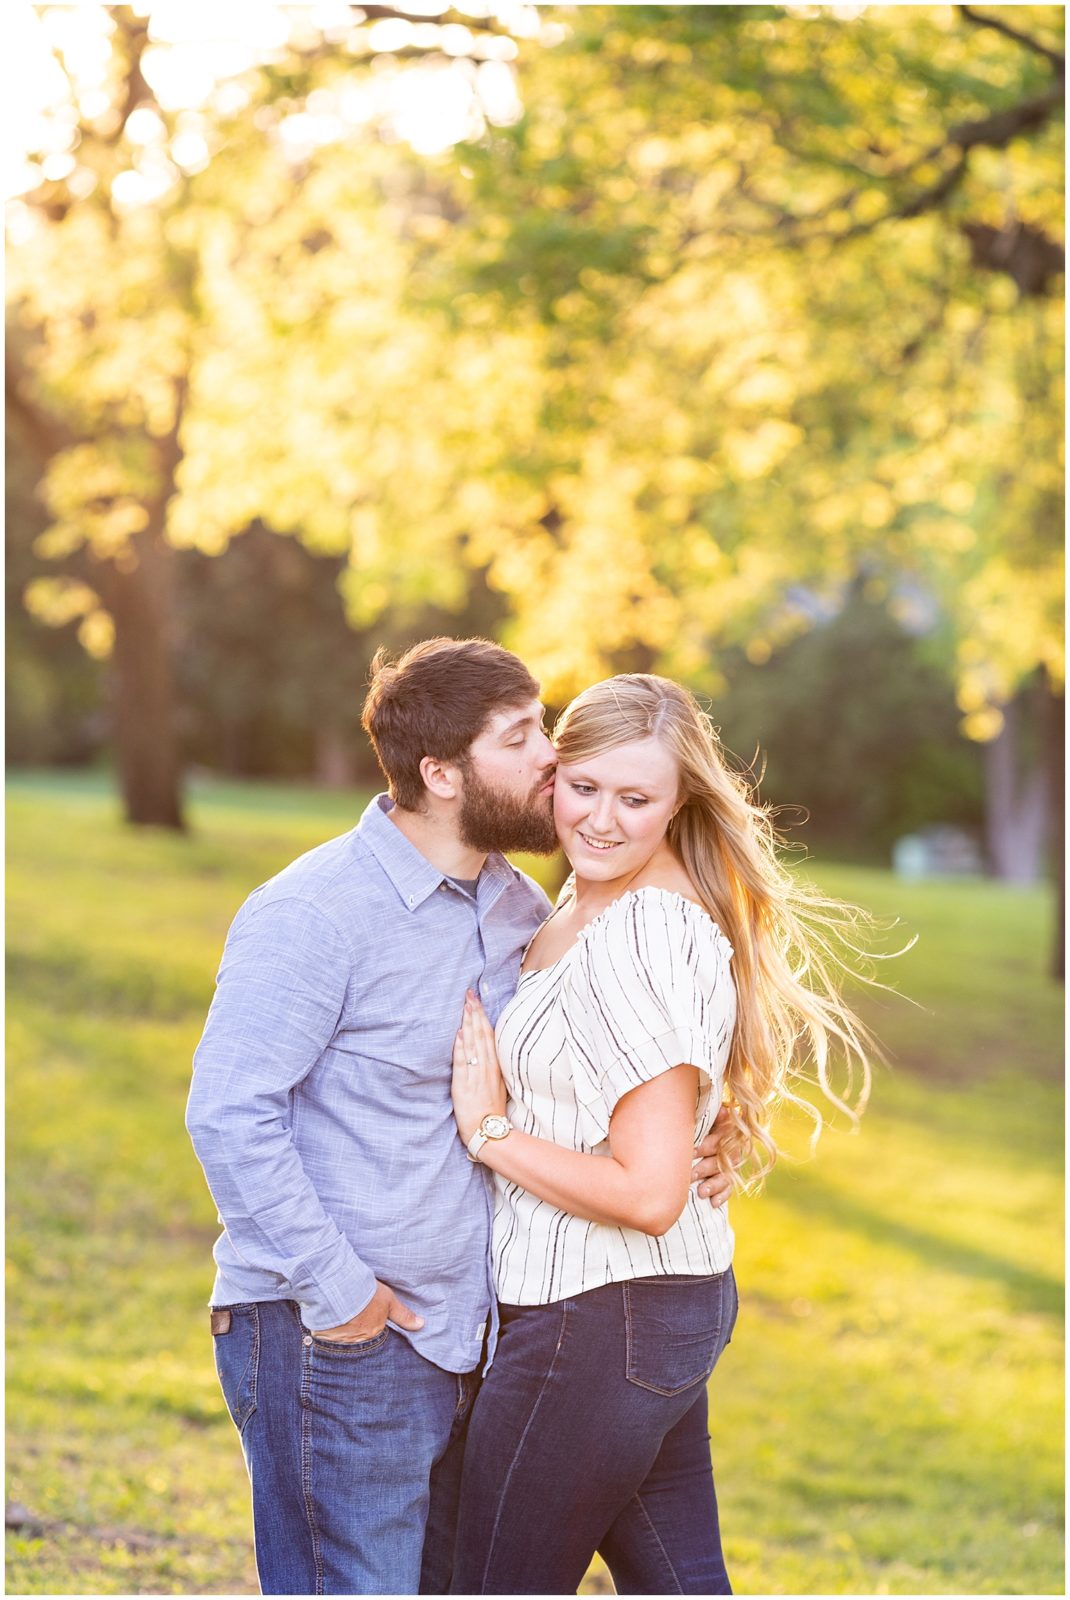 Colorful Spring Engagement Session | Engagement Portraits in Sioux City, Iowa shot by Jessica Brees Photography